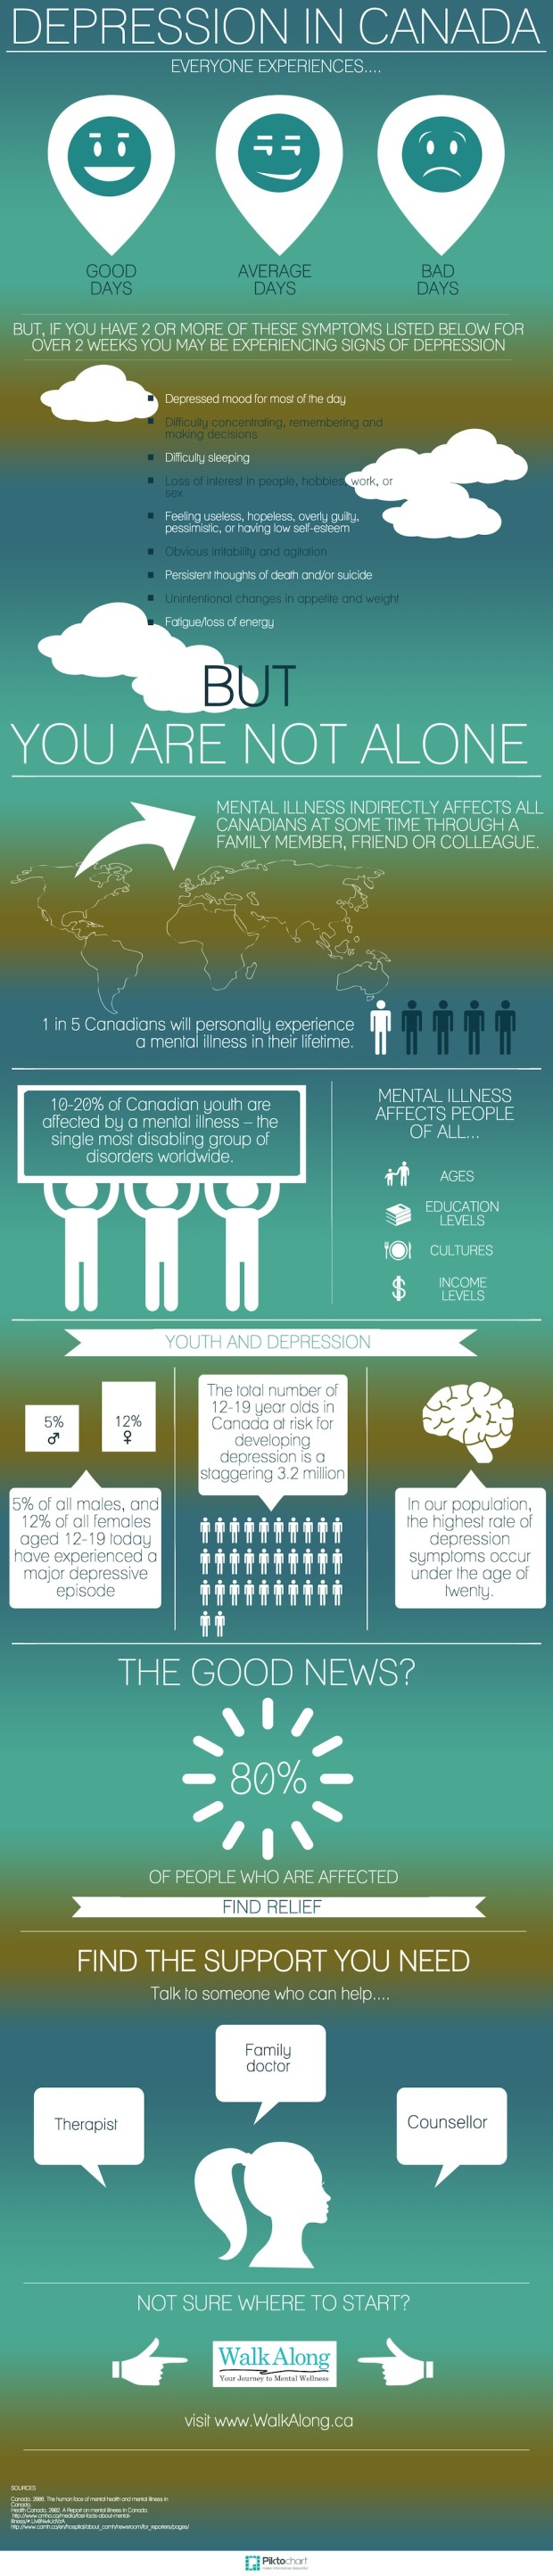 An Infographic about Depression